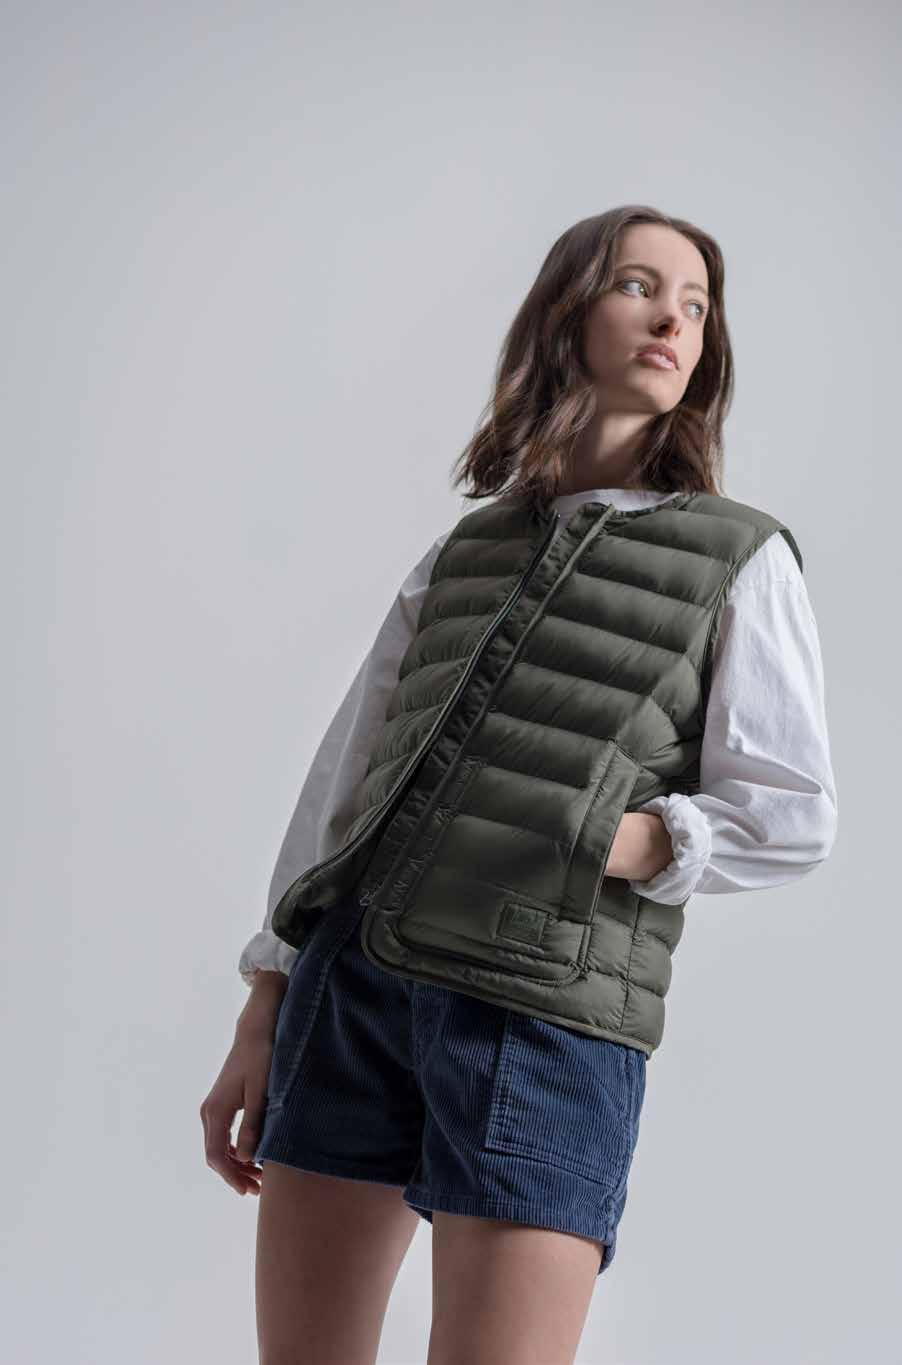 DESIGNED FOR COOL WEATHER DISCOVERIES, THE INSULATED COLLECTION COMBINES THERMAL EFFICIENCY WITH MODERN DESIGN.